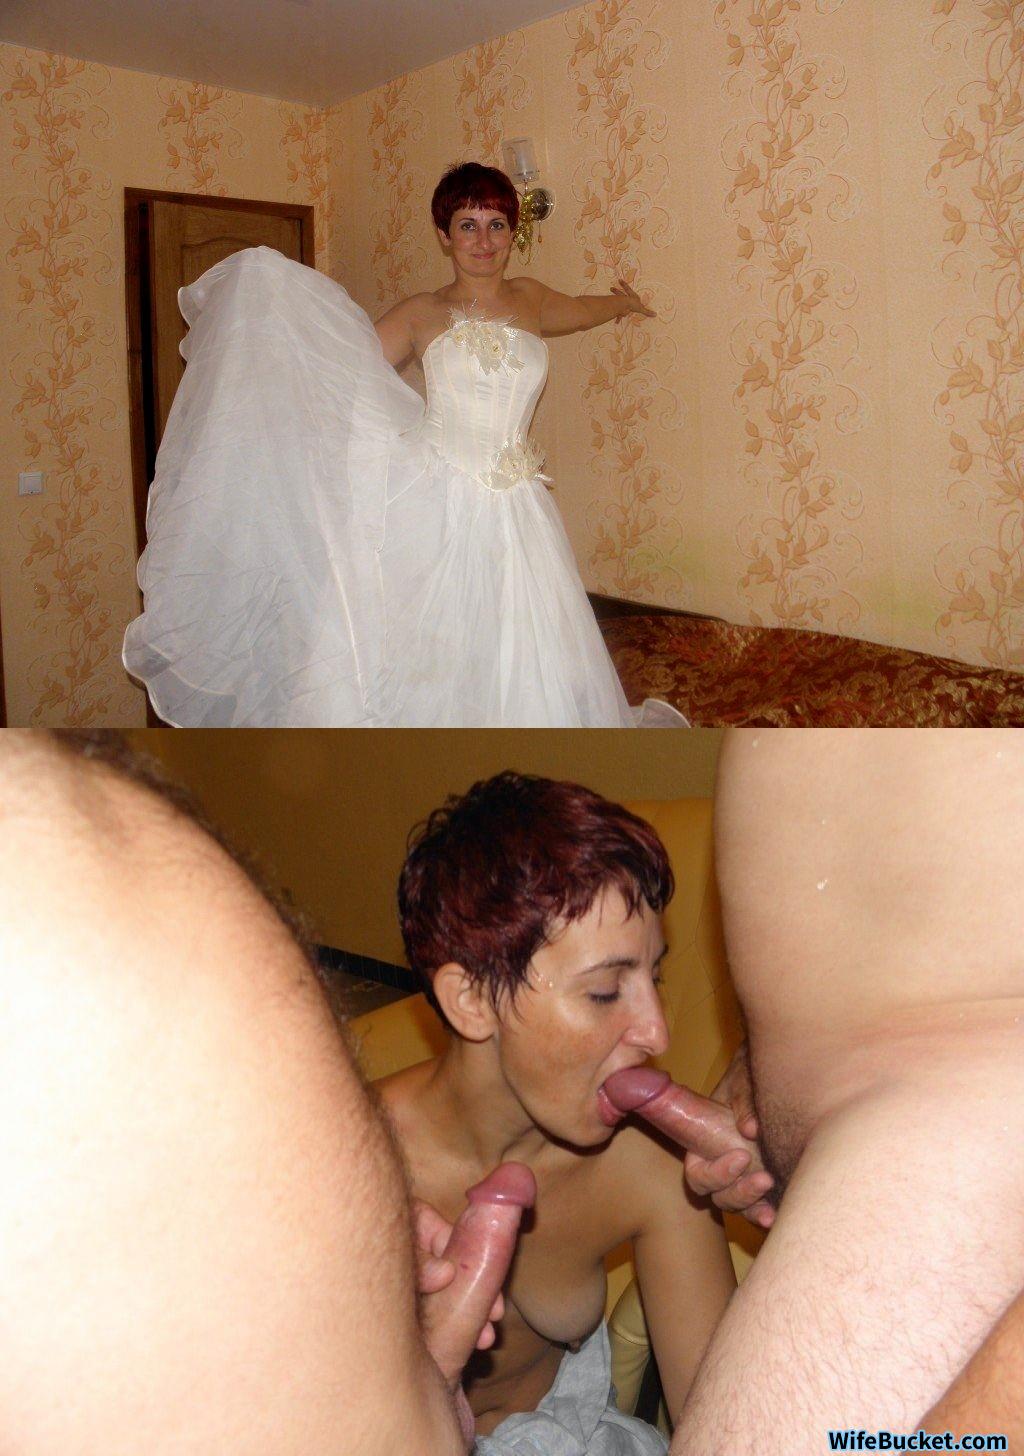 GALLERY Before-after nudes of real brides!